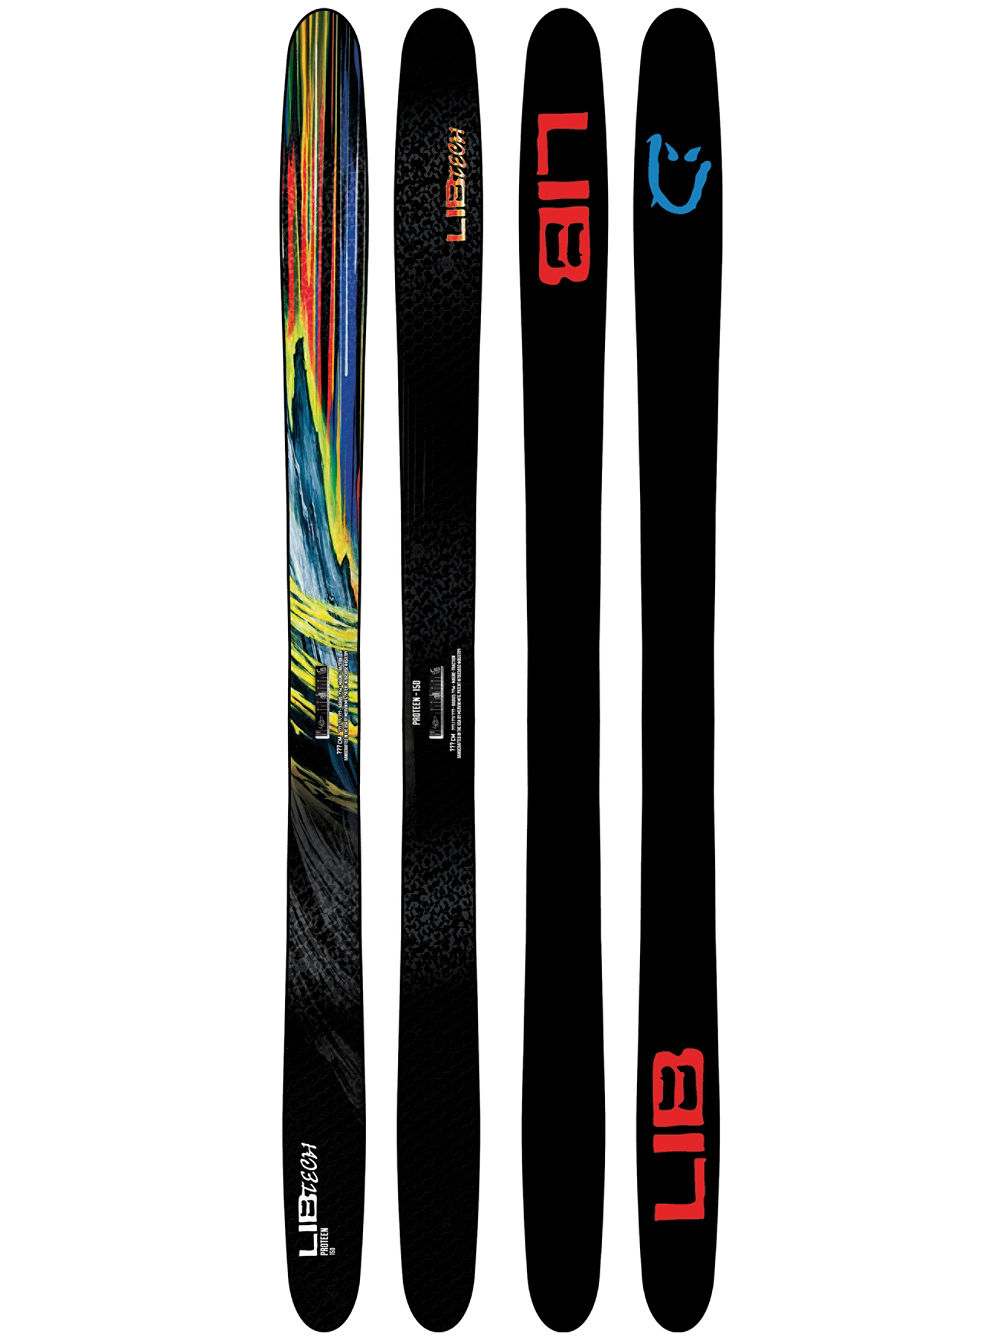 Proteen 100mm 150 Skis